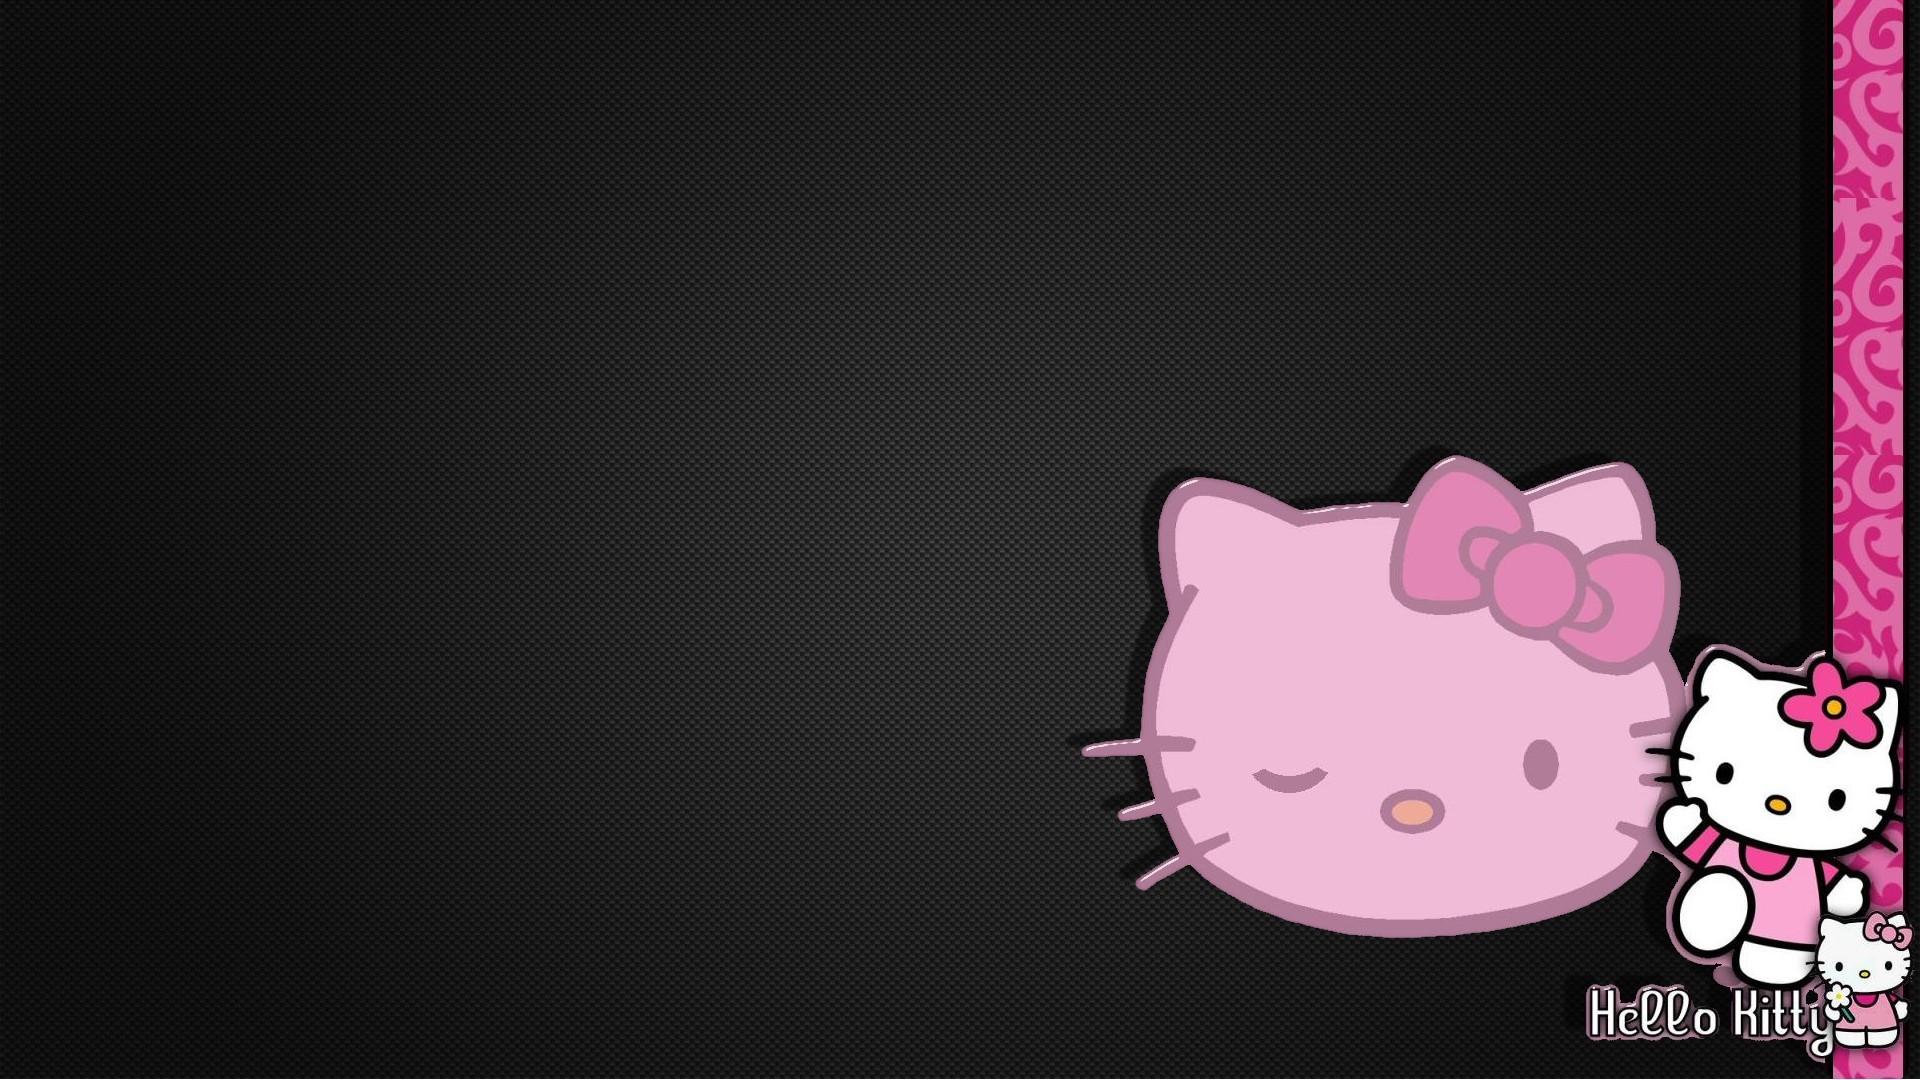 Kitty Wallpaper with image resolution 1920x1080 pixel. You can use this wallpaper as background for your desktop Computer Screensavers, Android or iPhone smartphones